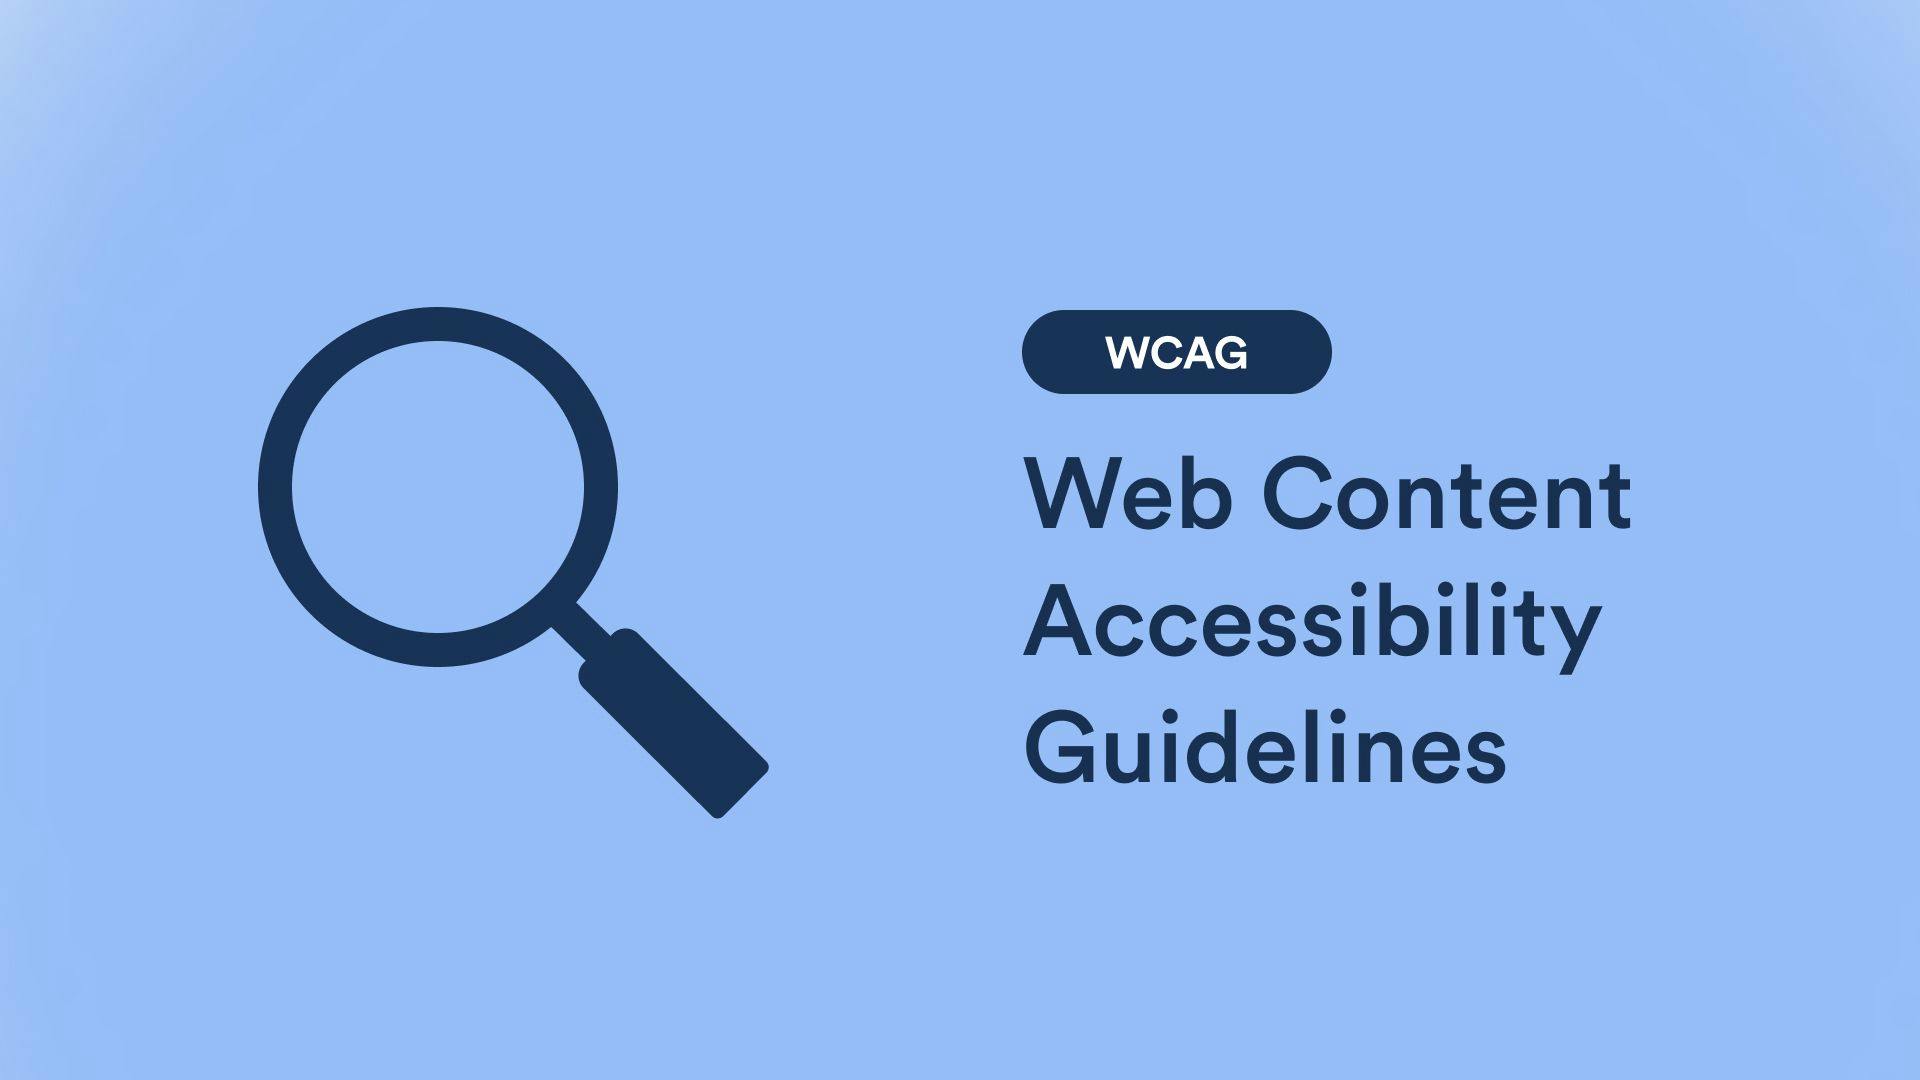 WCAG-regulations: What is WCAG?